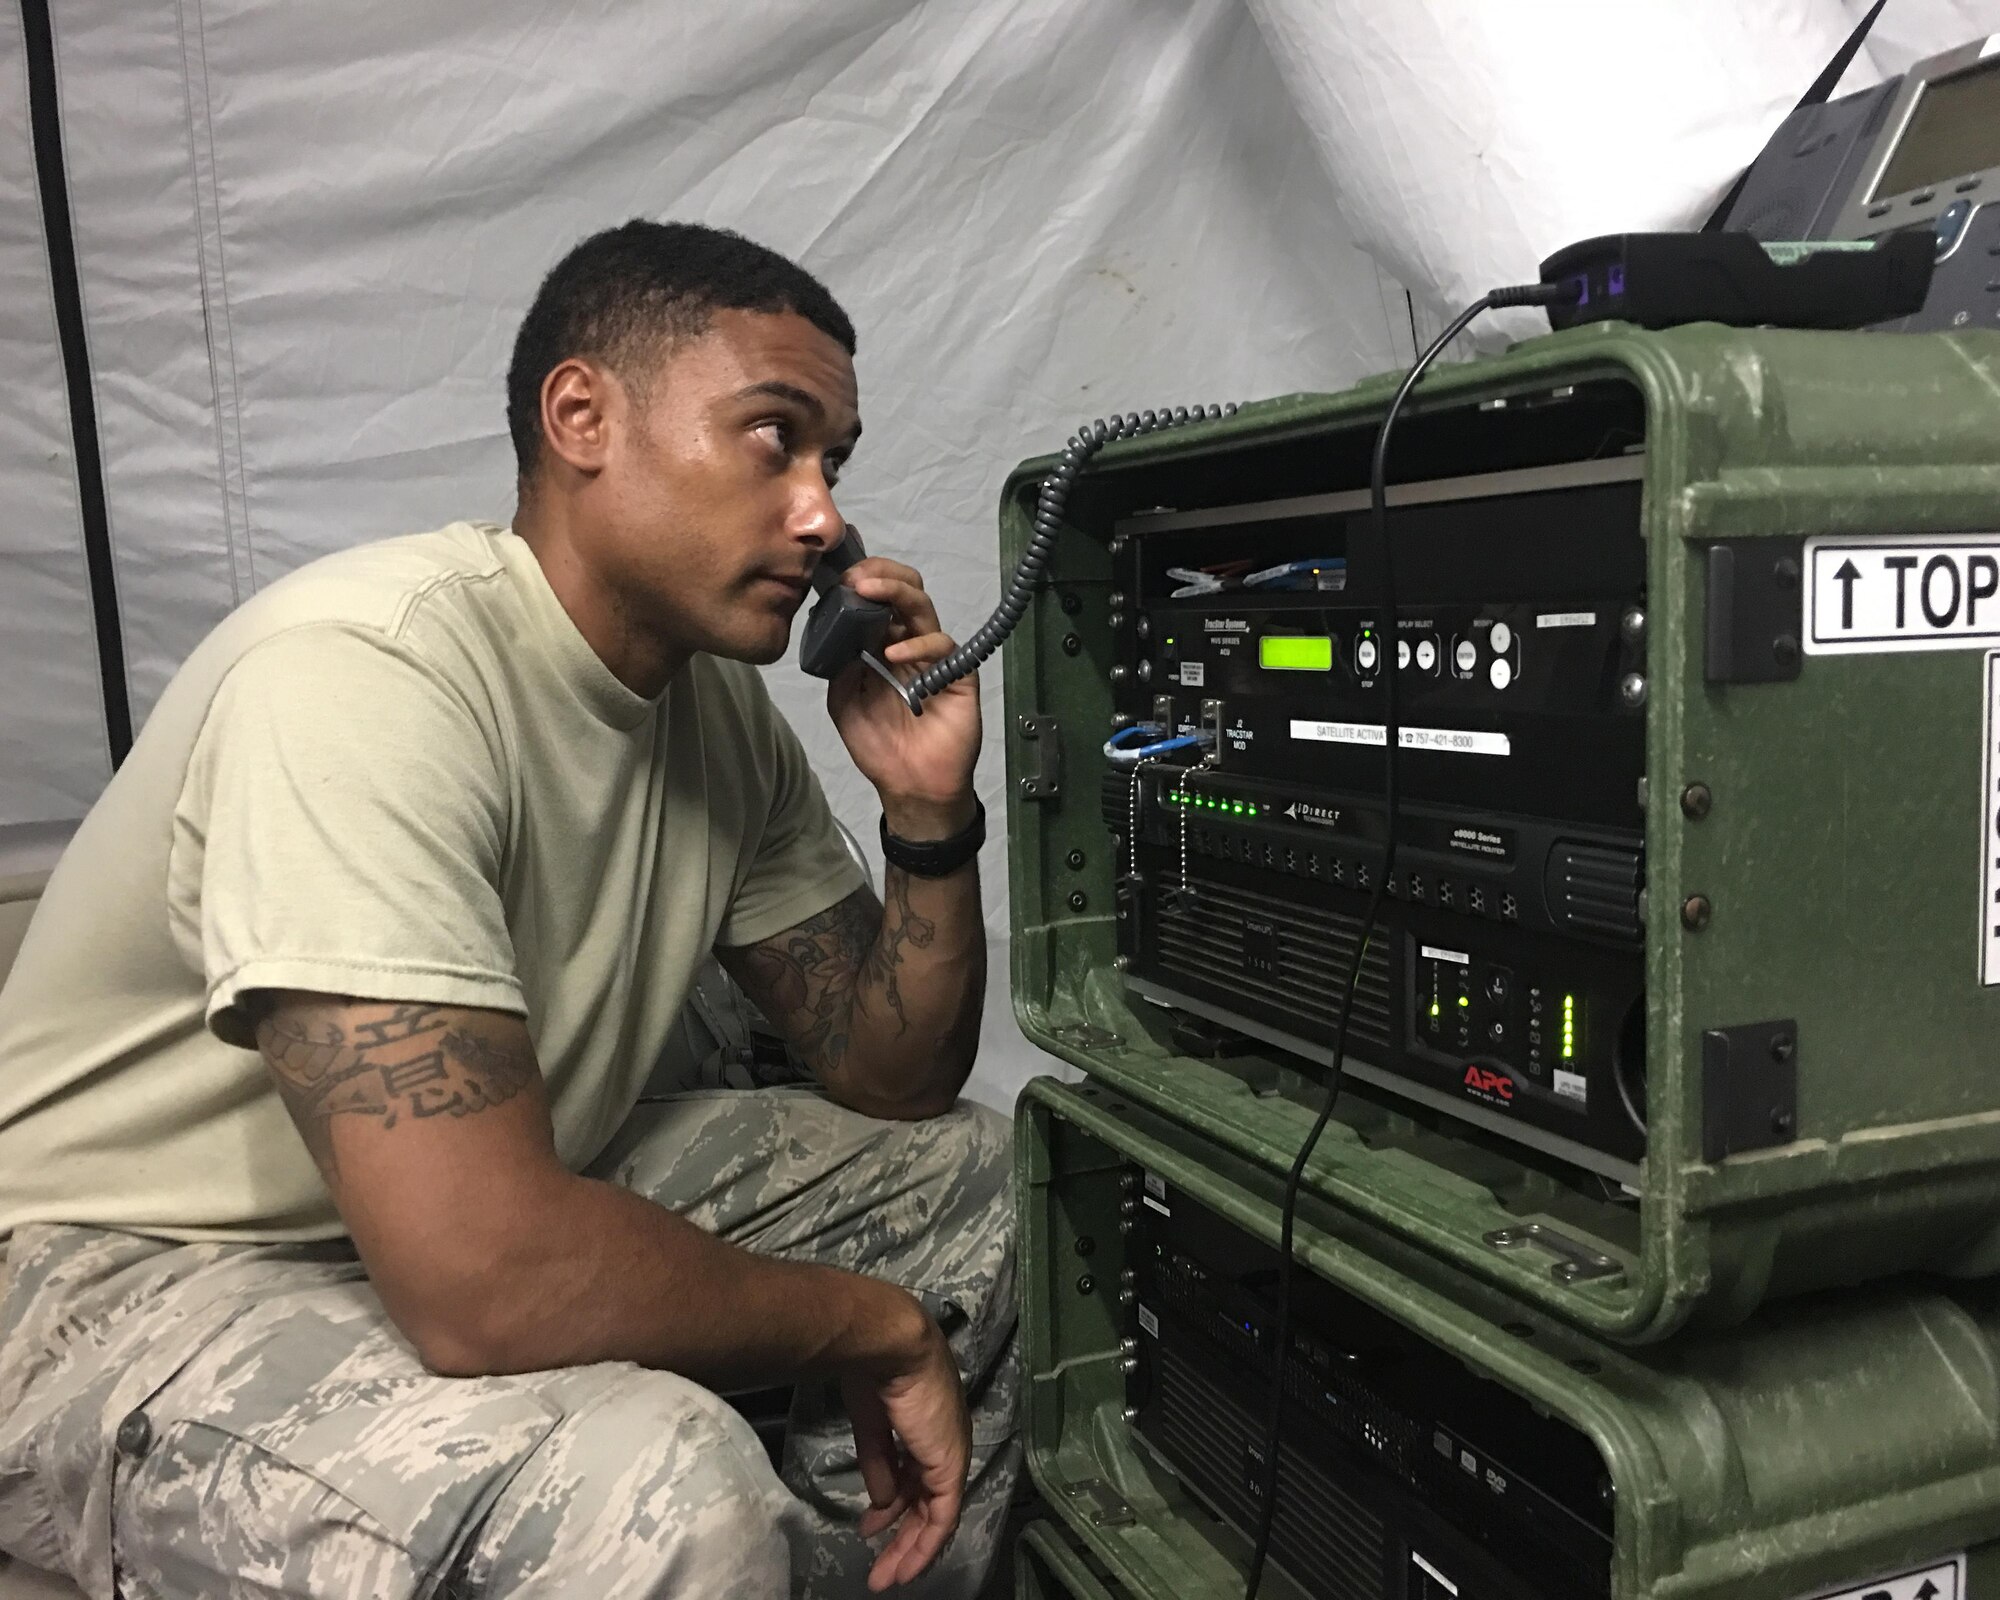 Staff Sgt. Helmut Woodberry of the Illinois Air National Guard’s 126th Communications Flight works on a radio frequency control unit in a Joint Incident Site Communications Capability site at Muniz Air National Guard Base, Puerto Rico. The Air National Guard is working with many federal, territory and local agencies in response to Hurricane Maria. (U.S. Air National Guard photo by Tech. Sgt. Dan Heaton)